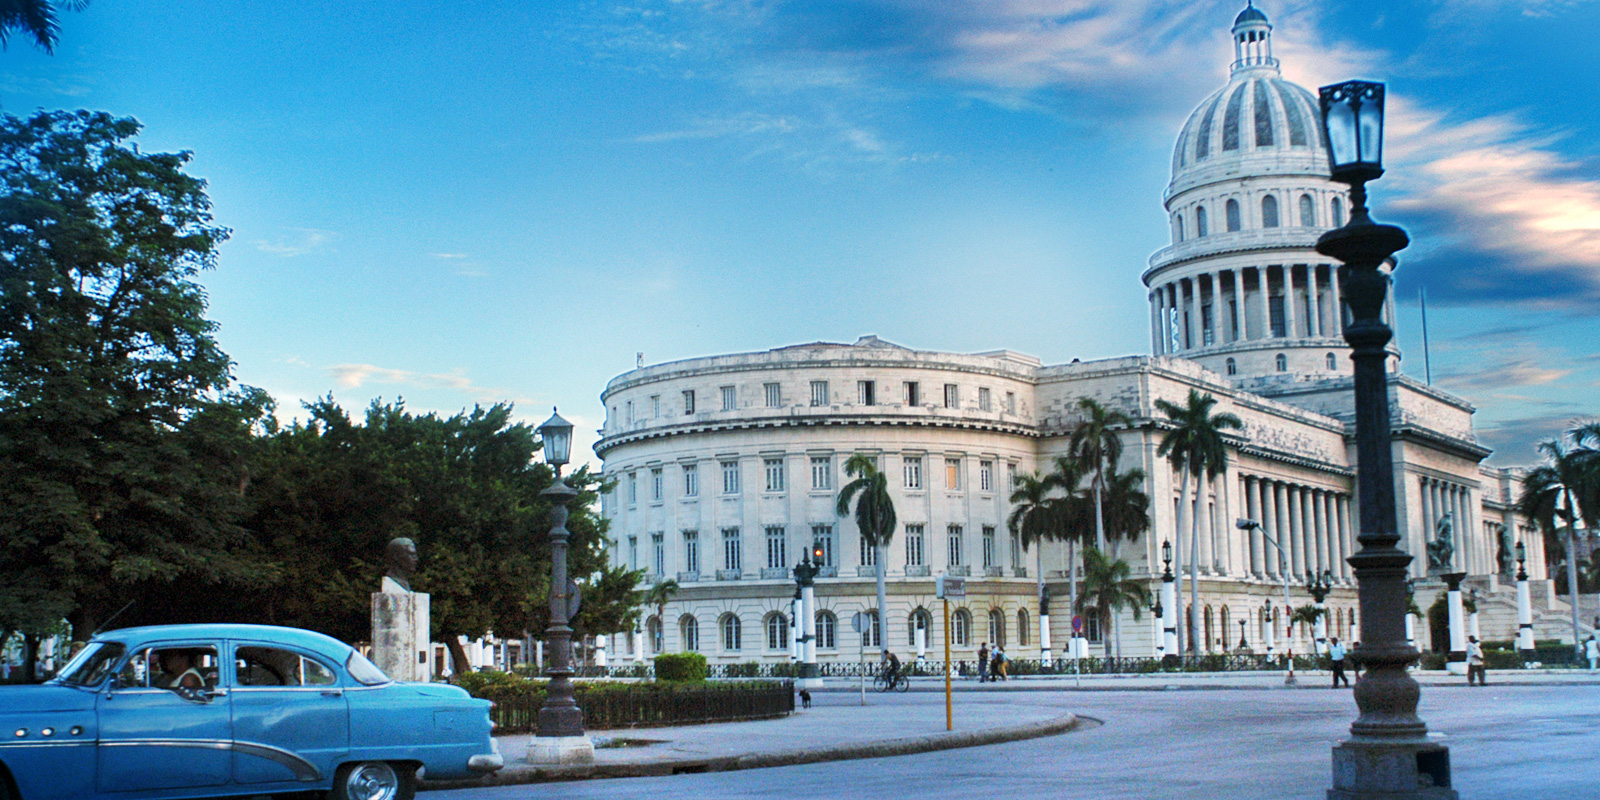 Revised U.S. Regulations Support Cuba's Private Sector, but Travel Restrictions Remain